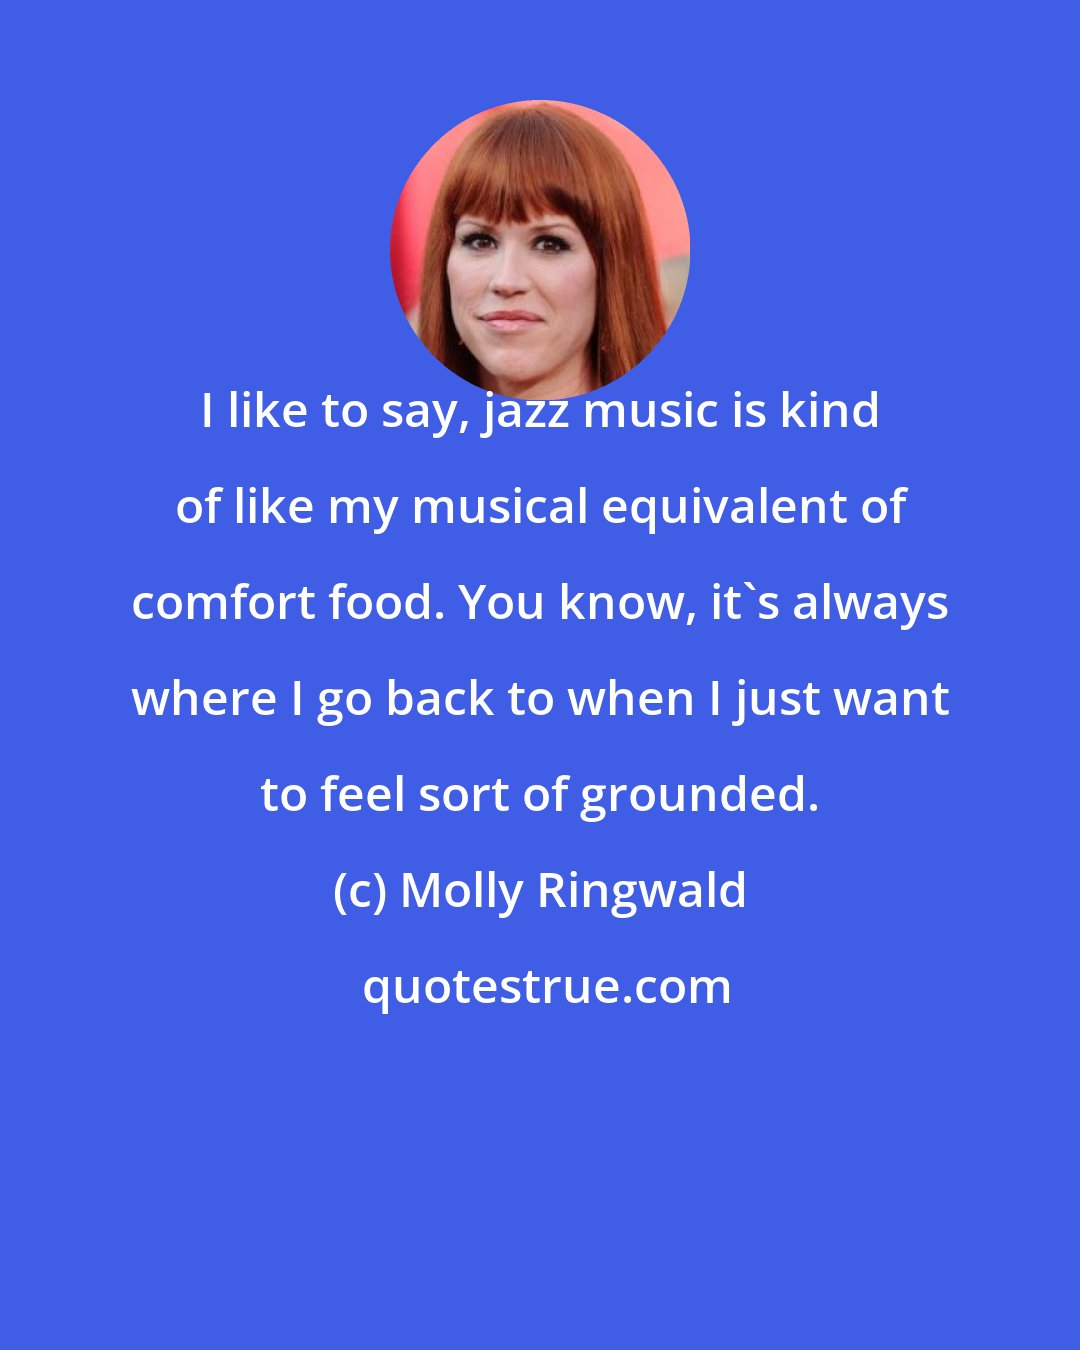 Molly Ringwald: I like to say, jazz music is kind of like my musical equivalent of comfort food. You know, it's always where I go back to when I just want to feel sort of grounded.